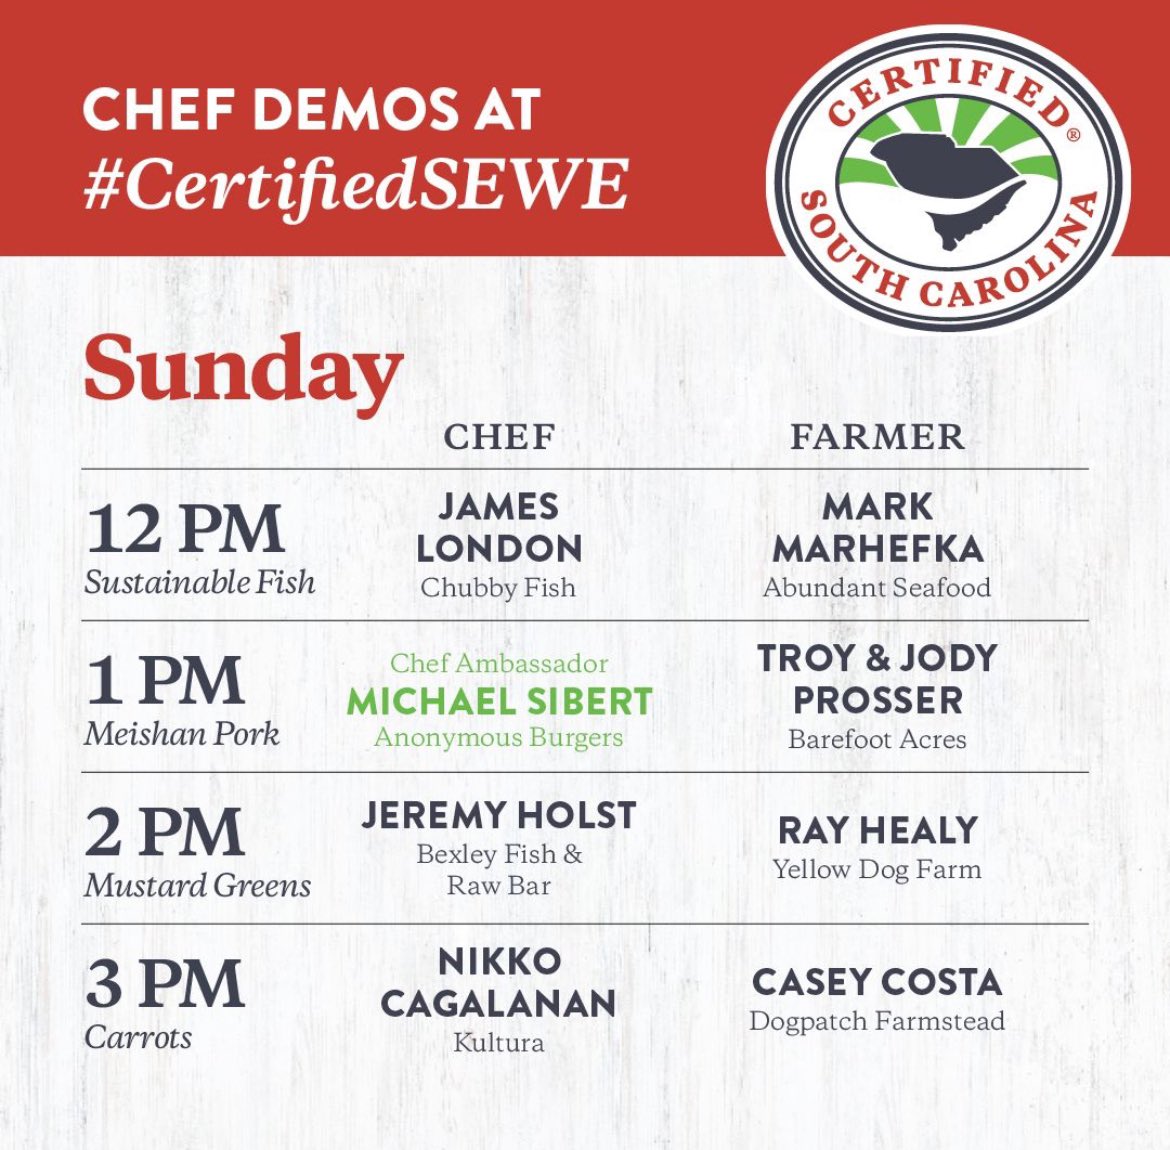 Day 3 of #CertifiedSEWE starts now! We’ve got a great lineup for the final day of the @FreshOnTheMenu stage!